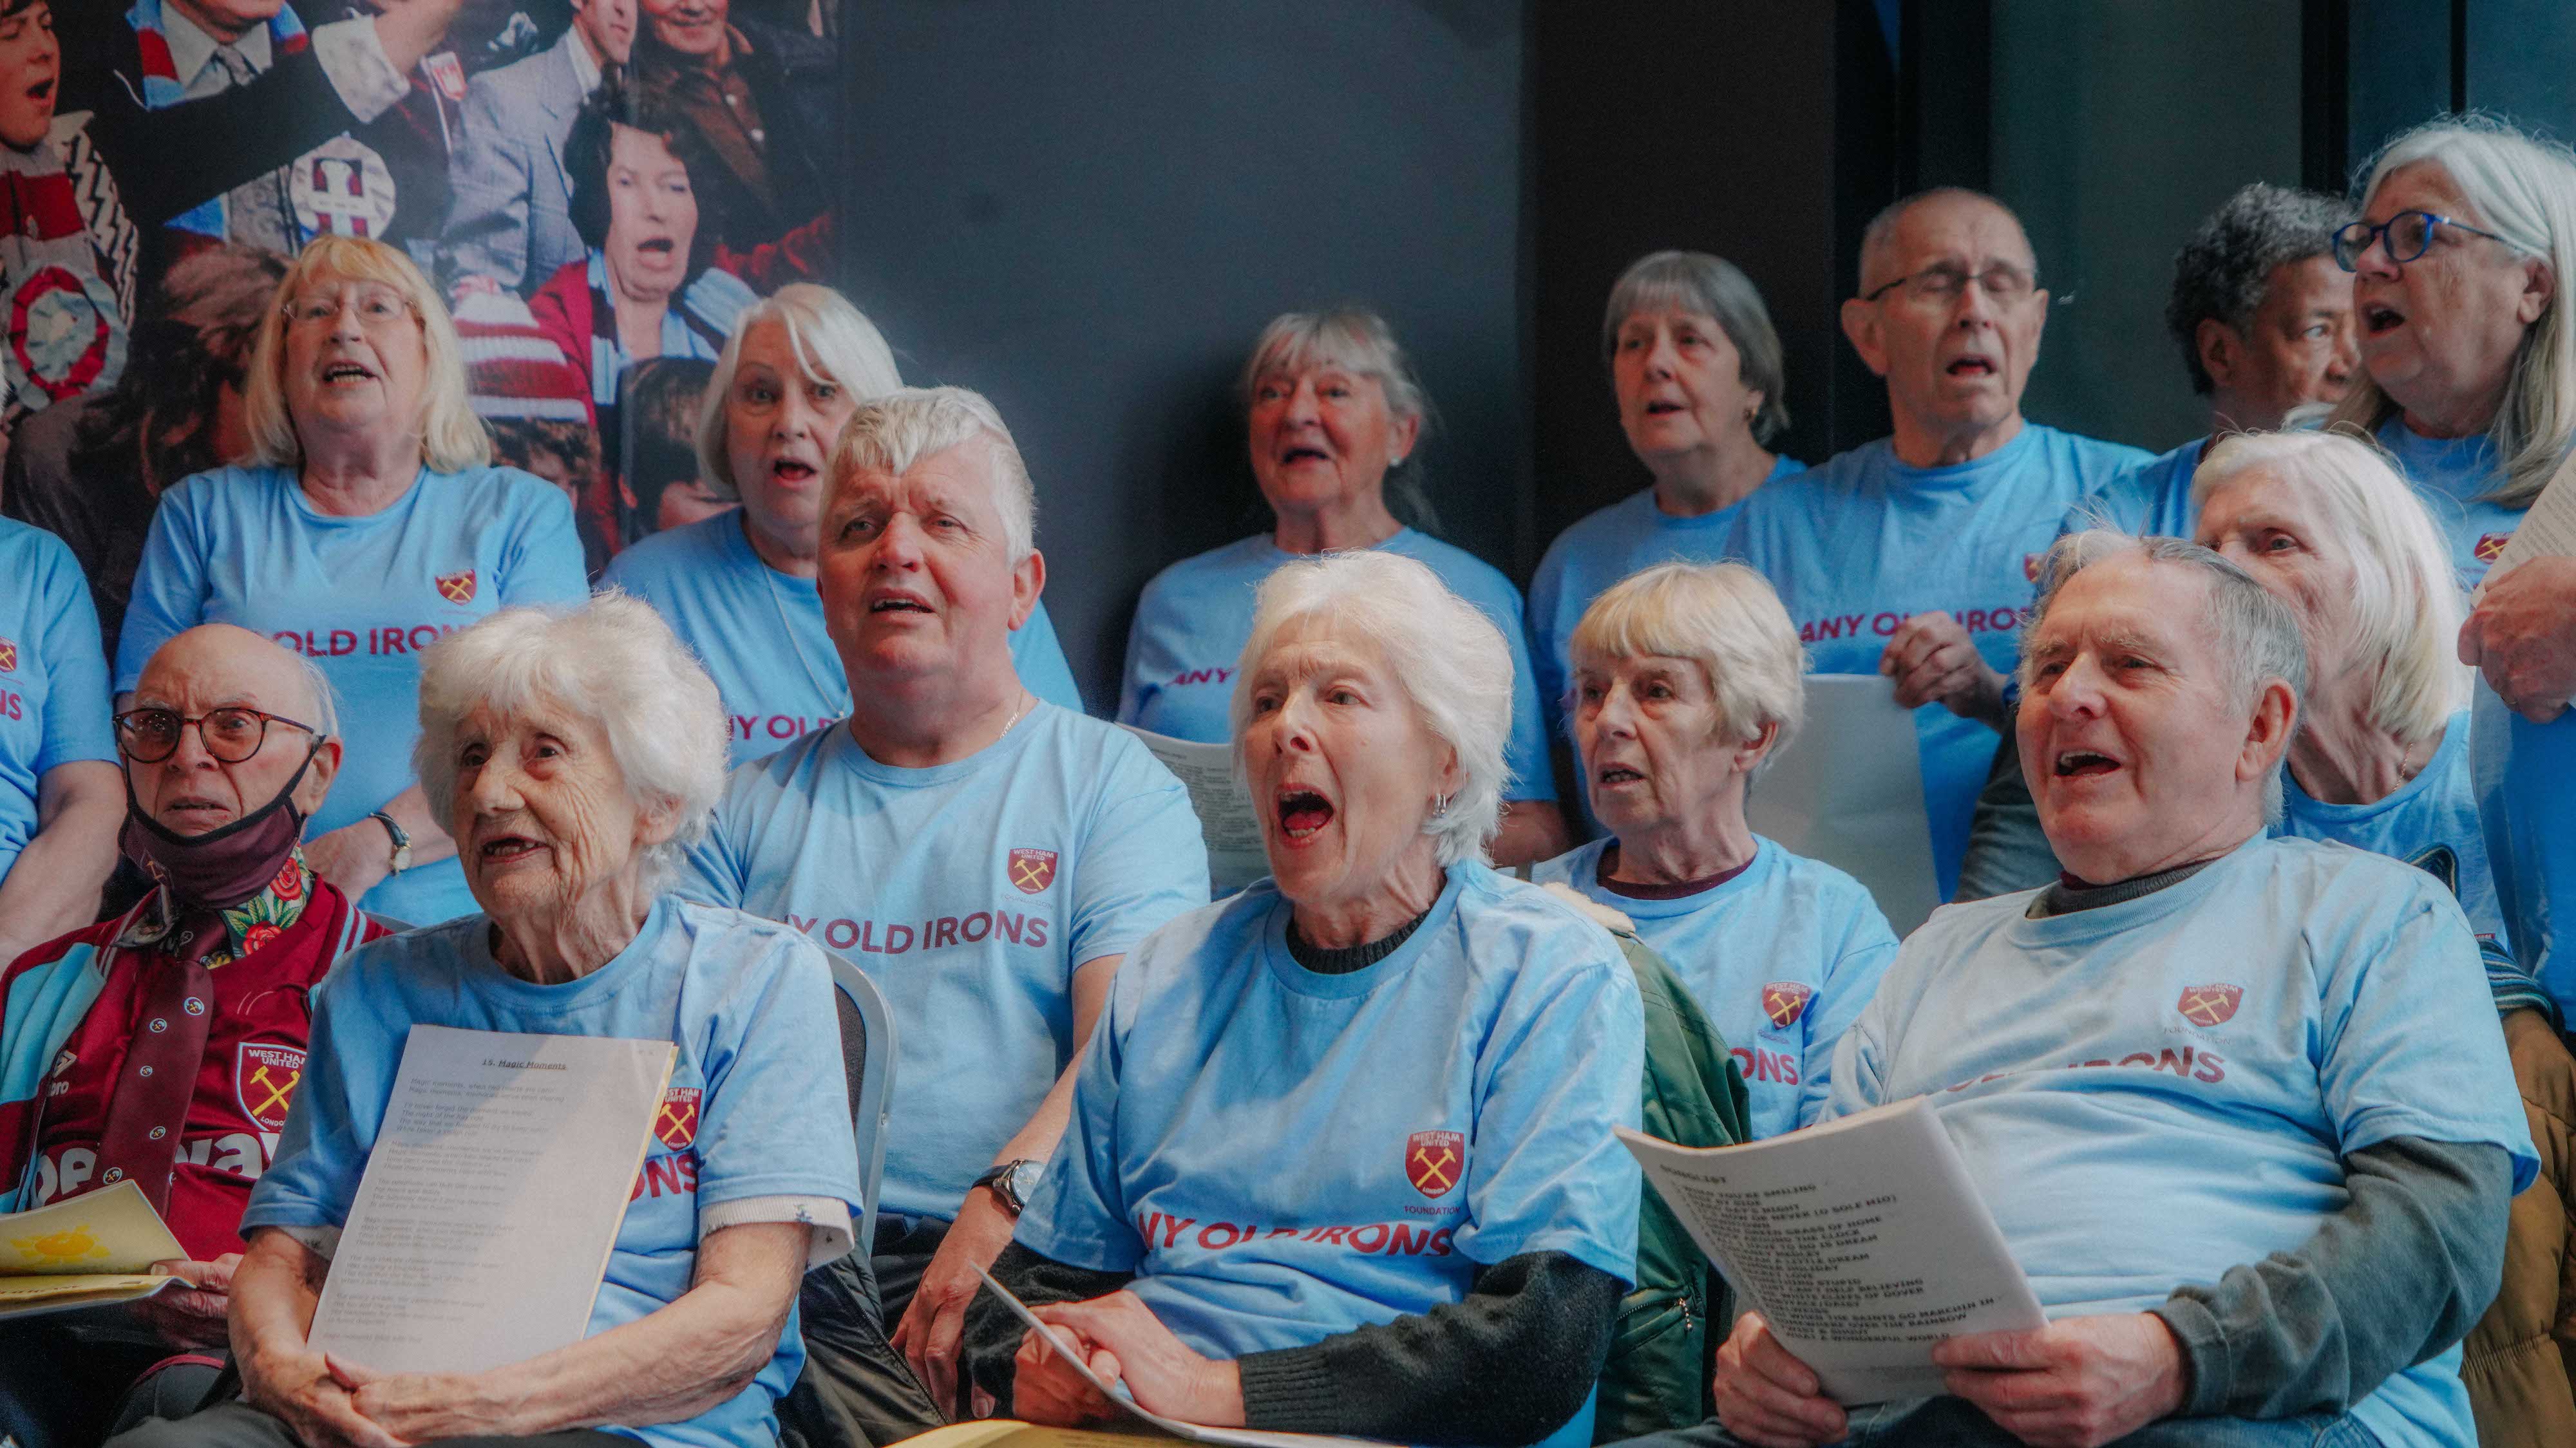 Any Old Irons singing at stadium store café